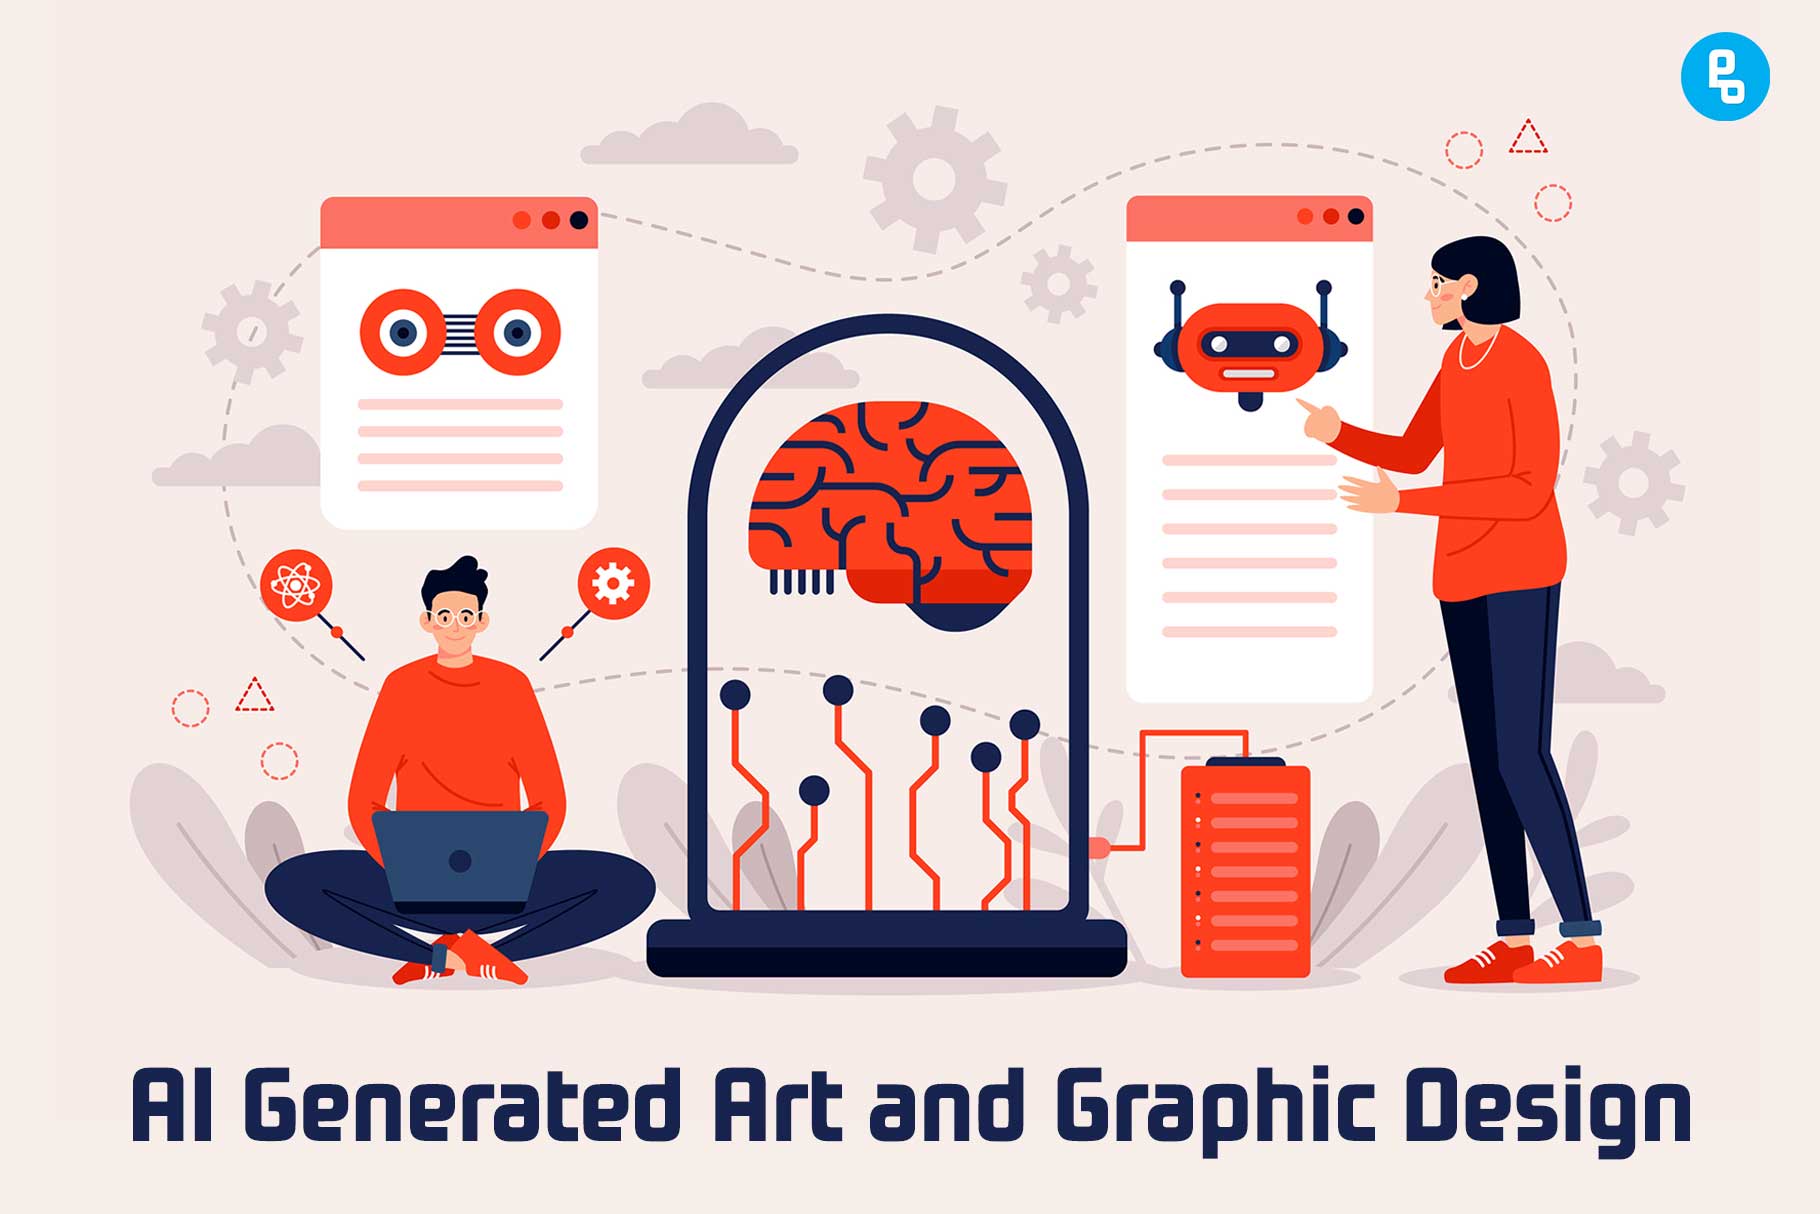 The next wave of AI-generated art and design will open up new creative possibilities for designers and other artists, allowing them to create more diverse works.